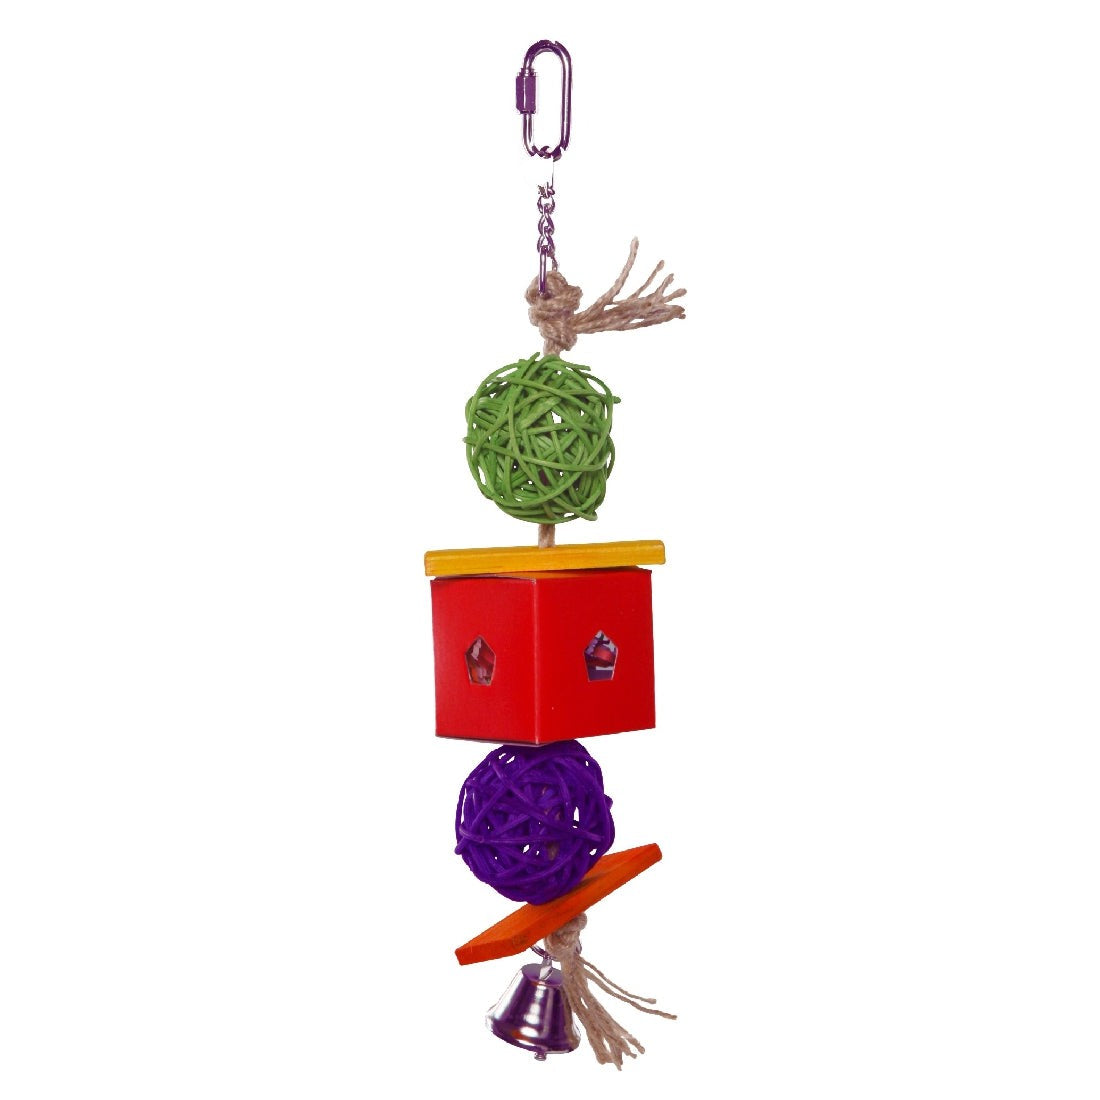 Colorful hanging bird toy with blocks, balls, and bell.